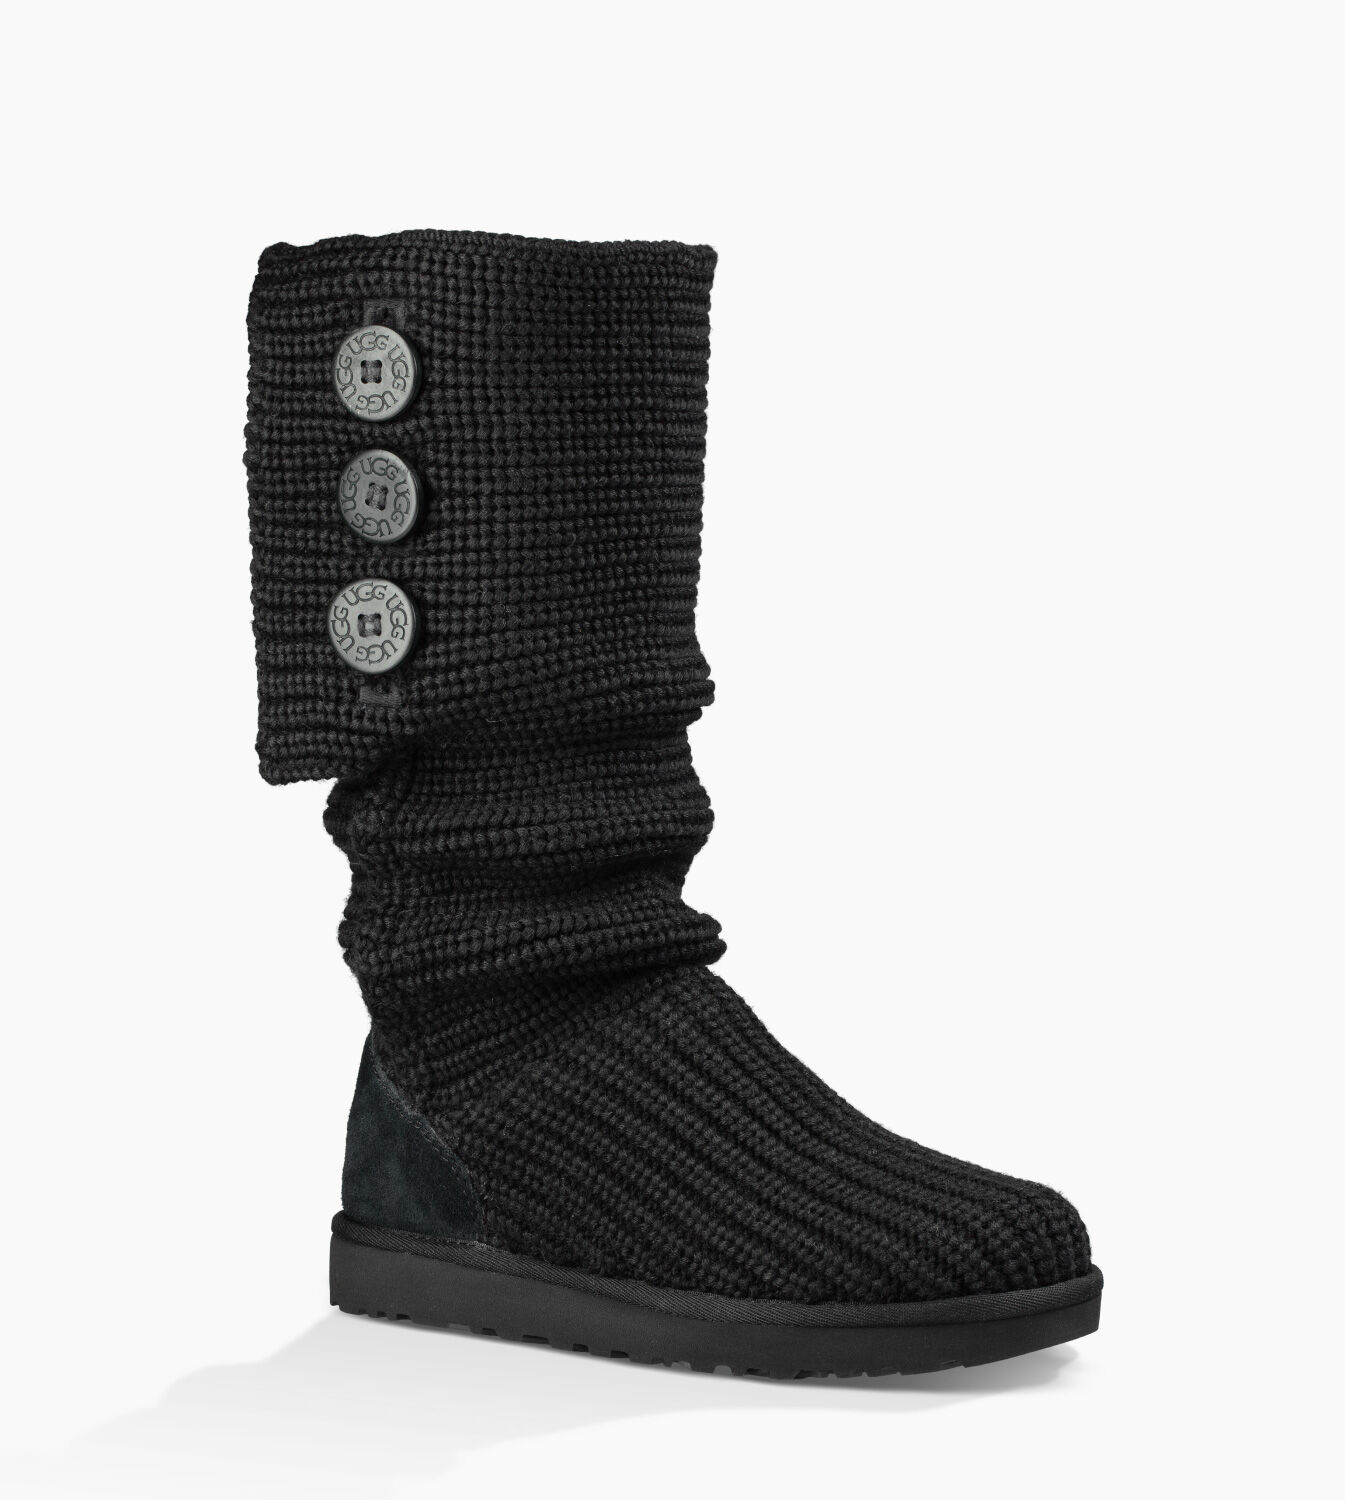 Classic UGG Cardy Boots | UGG® Official